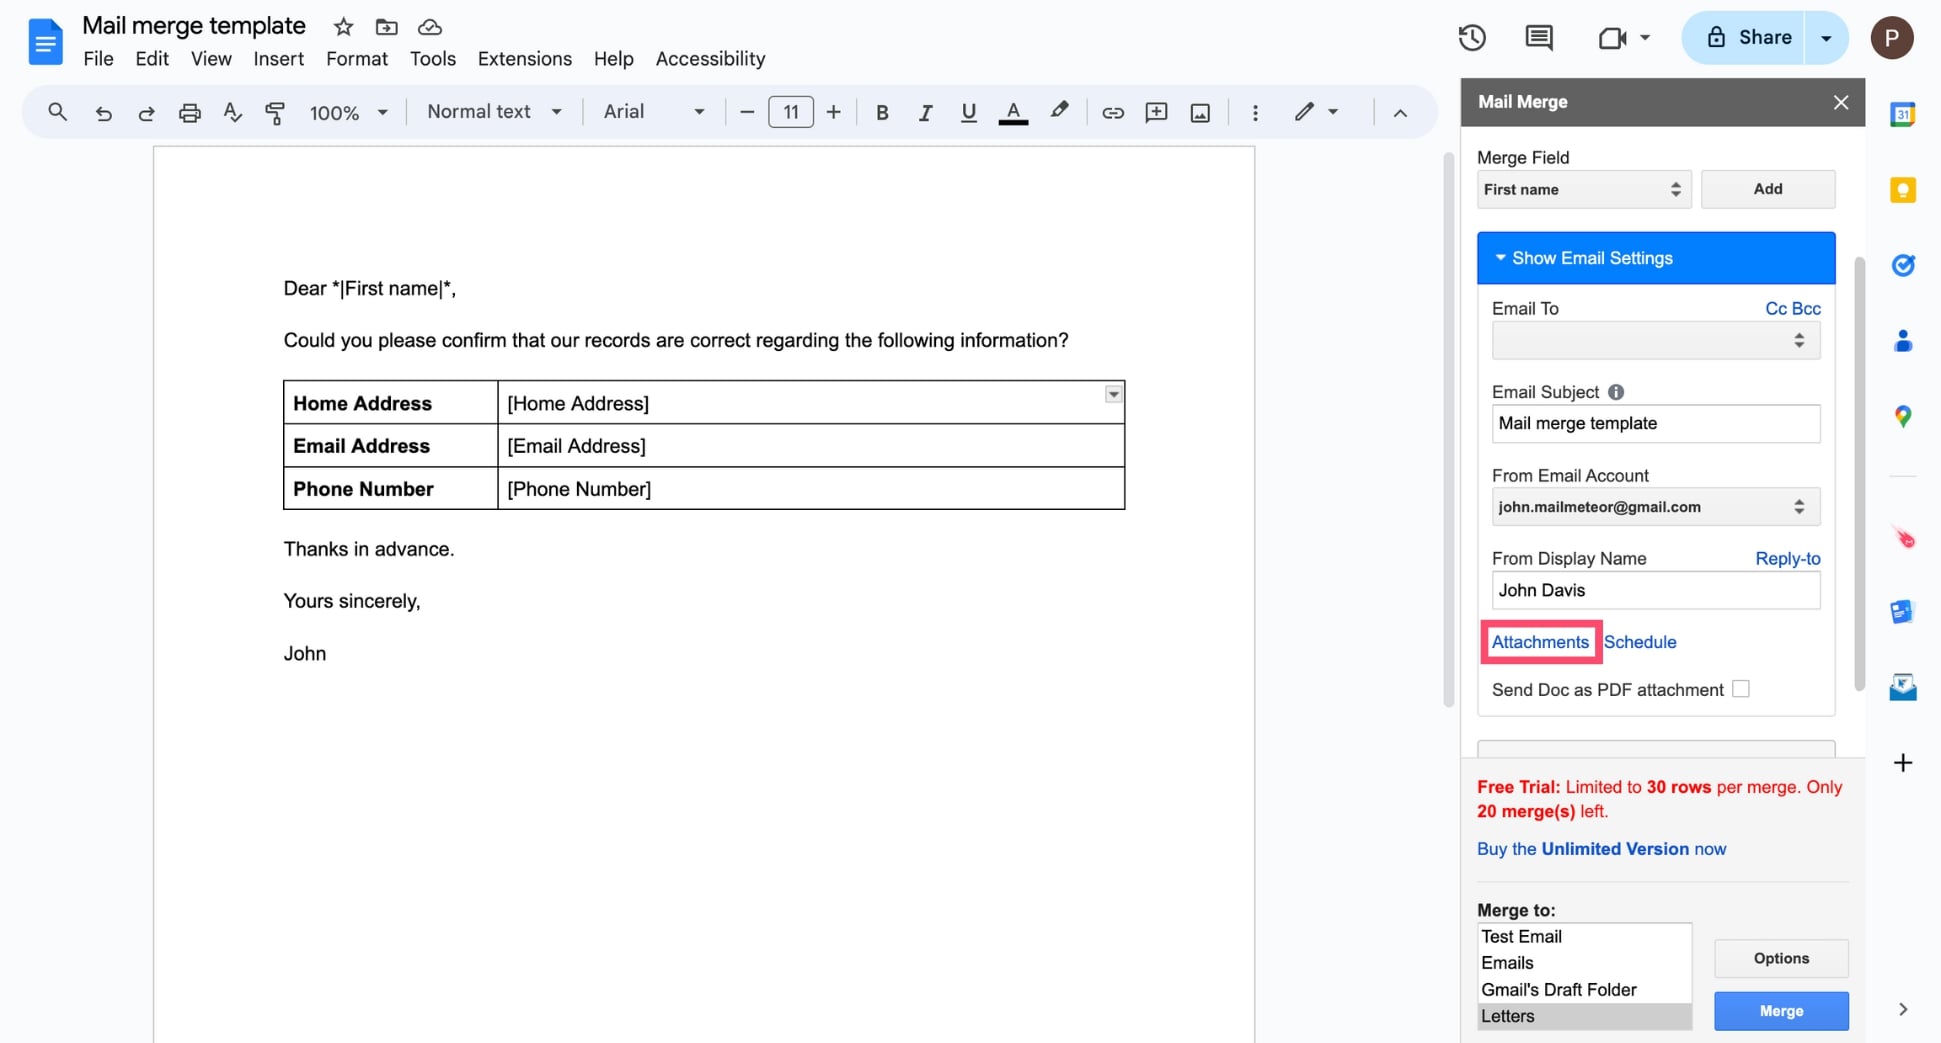 Add attachments to your mail merge in Google Docs